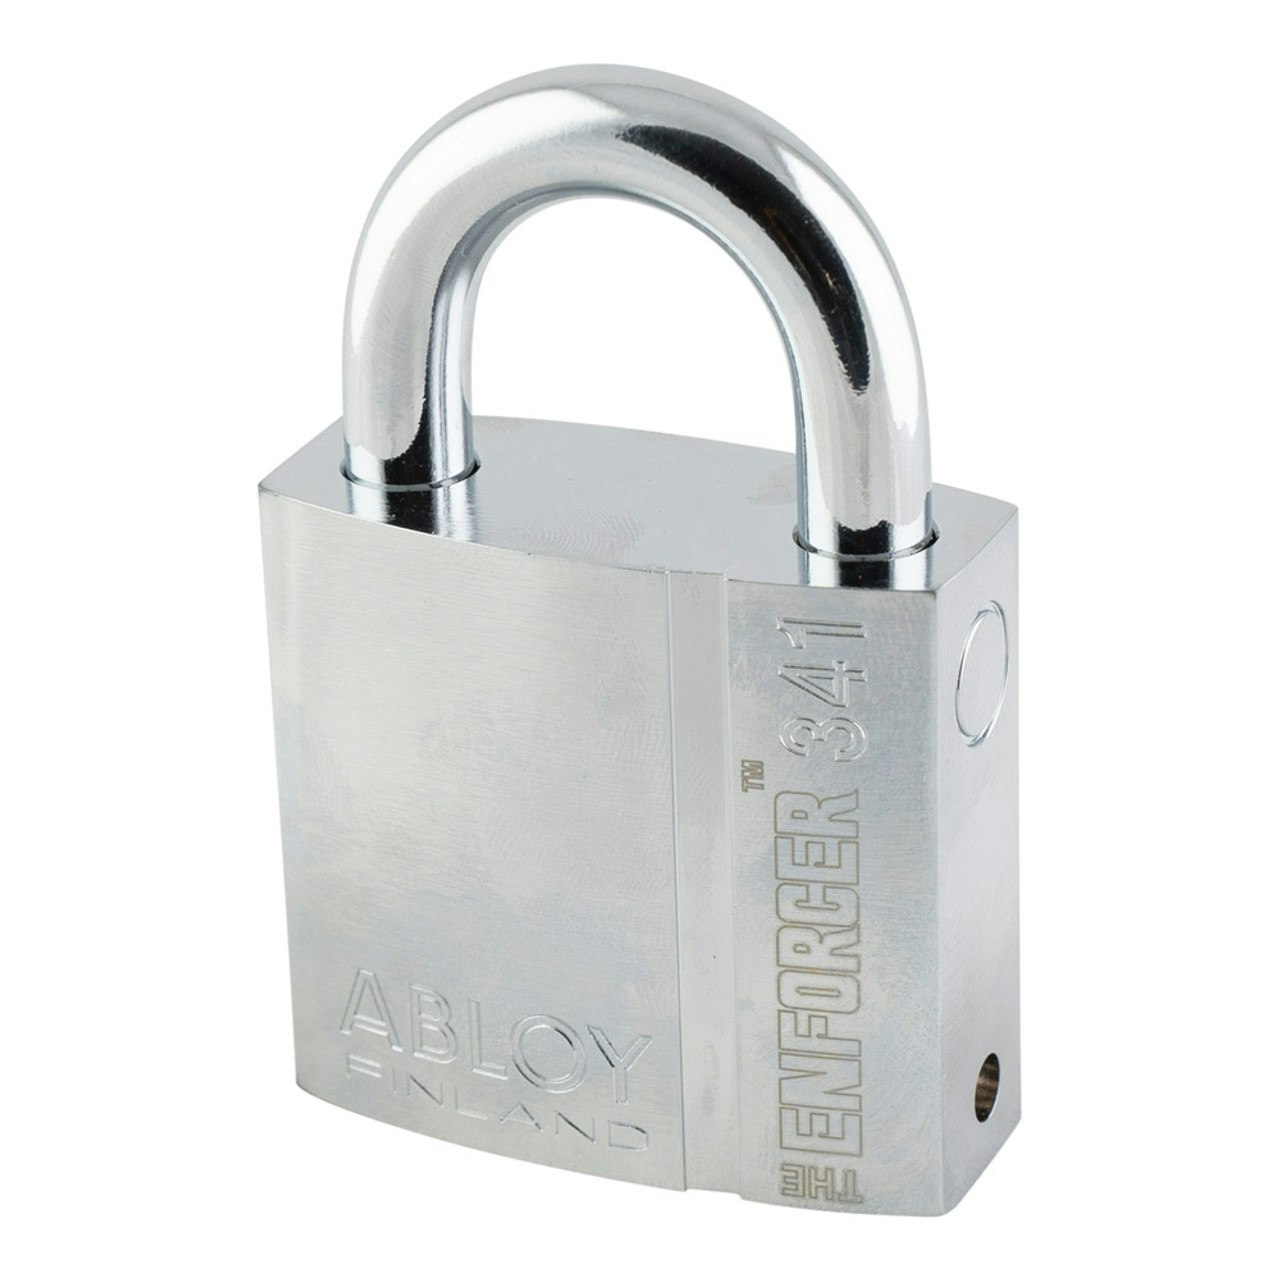 The Enforcer Abloy Padlock - Raney's